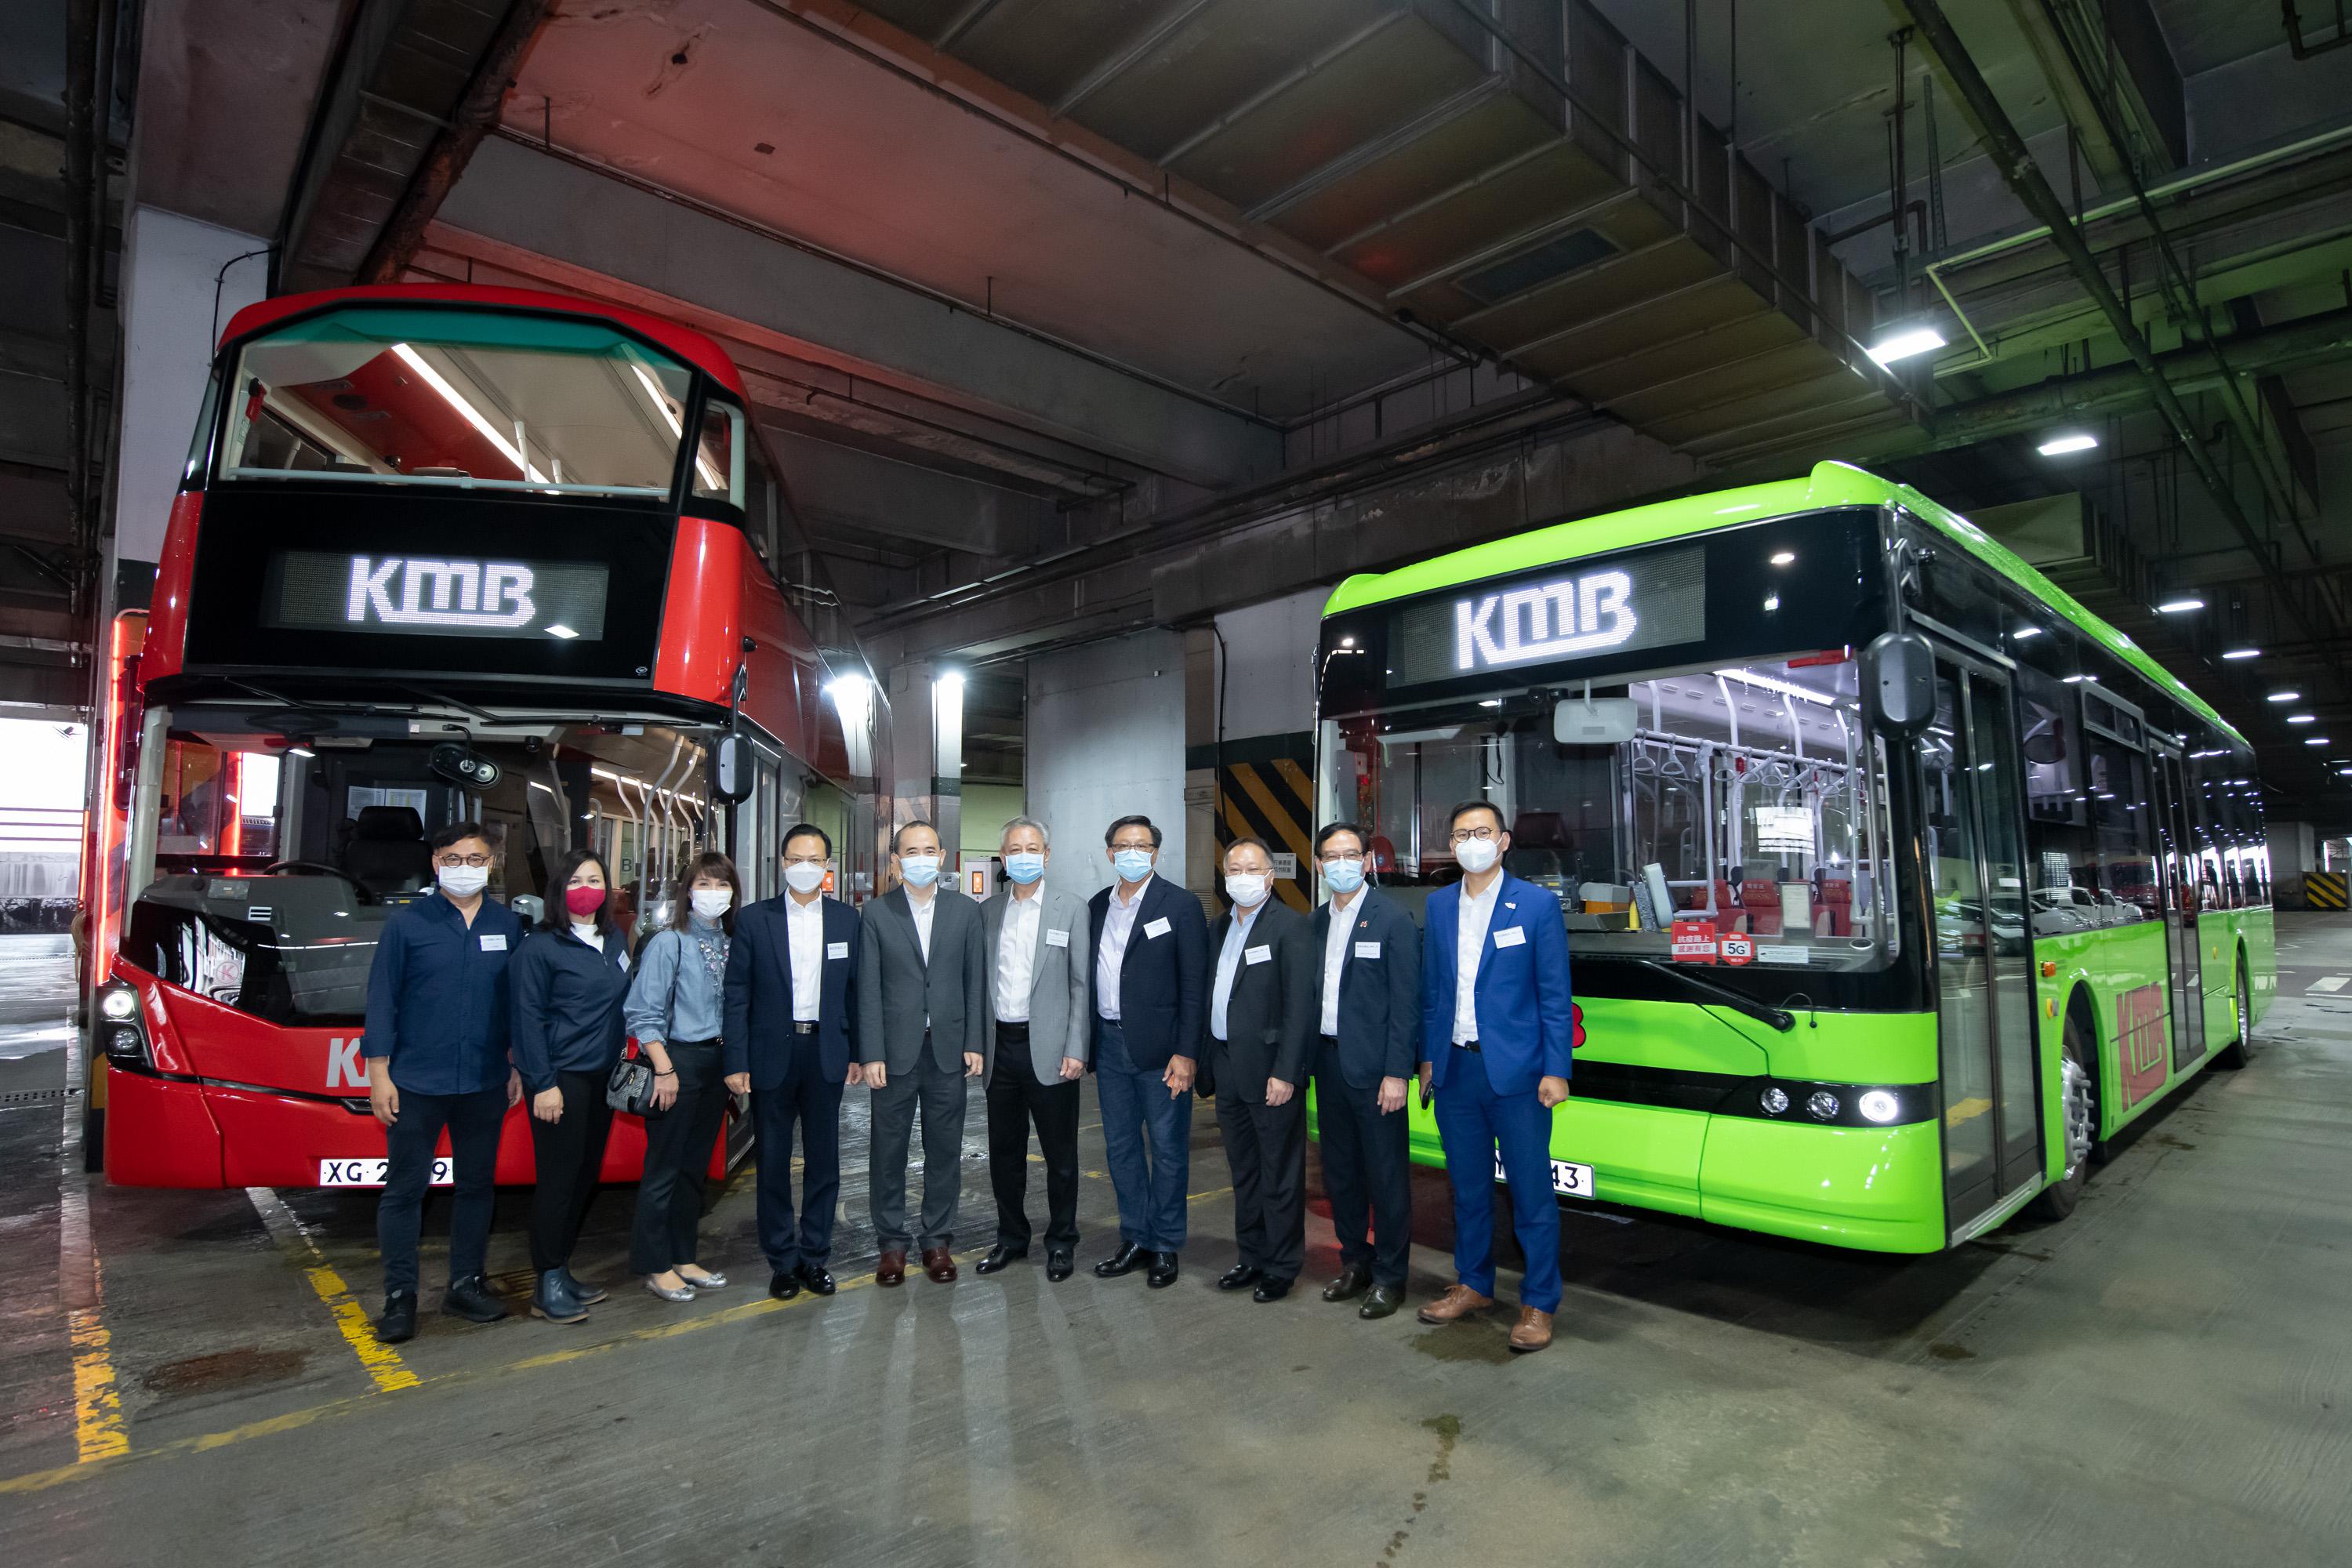 The Legislative Council (LegCo) Panel on Transport visits the bus depot of The Kowloon Motor Bus Company (1933) Limited (KMB) today (June 10). Photo shows (from right) Mr Chan Han-pan; Mr Tony Tse; Mr Andrew Lam; Dr Junius Ho; the Chairman of the Panel on Transport, Mr Frankie Yick; the Managing Director of KMB, Mr Roger Lee; the Deputy Panel Chairman, Mr Chan Siu-hung; Ms Doreen Kong; Ms Chan Yuet-ming; and Dr Tik Chi-yuen posing for a group photo in KMB’s bus depot. 